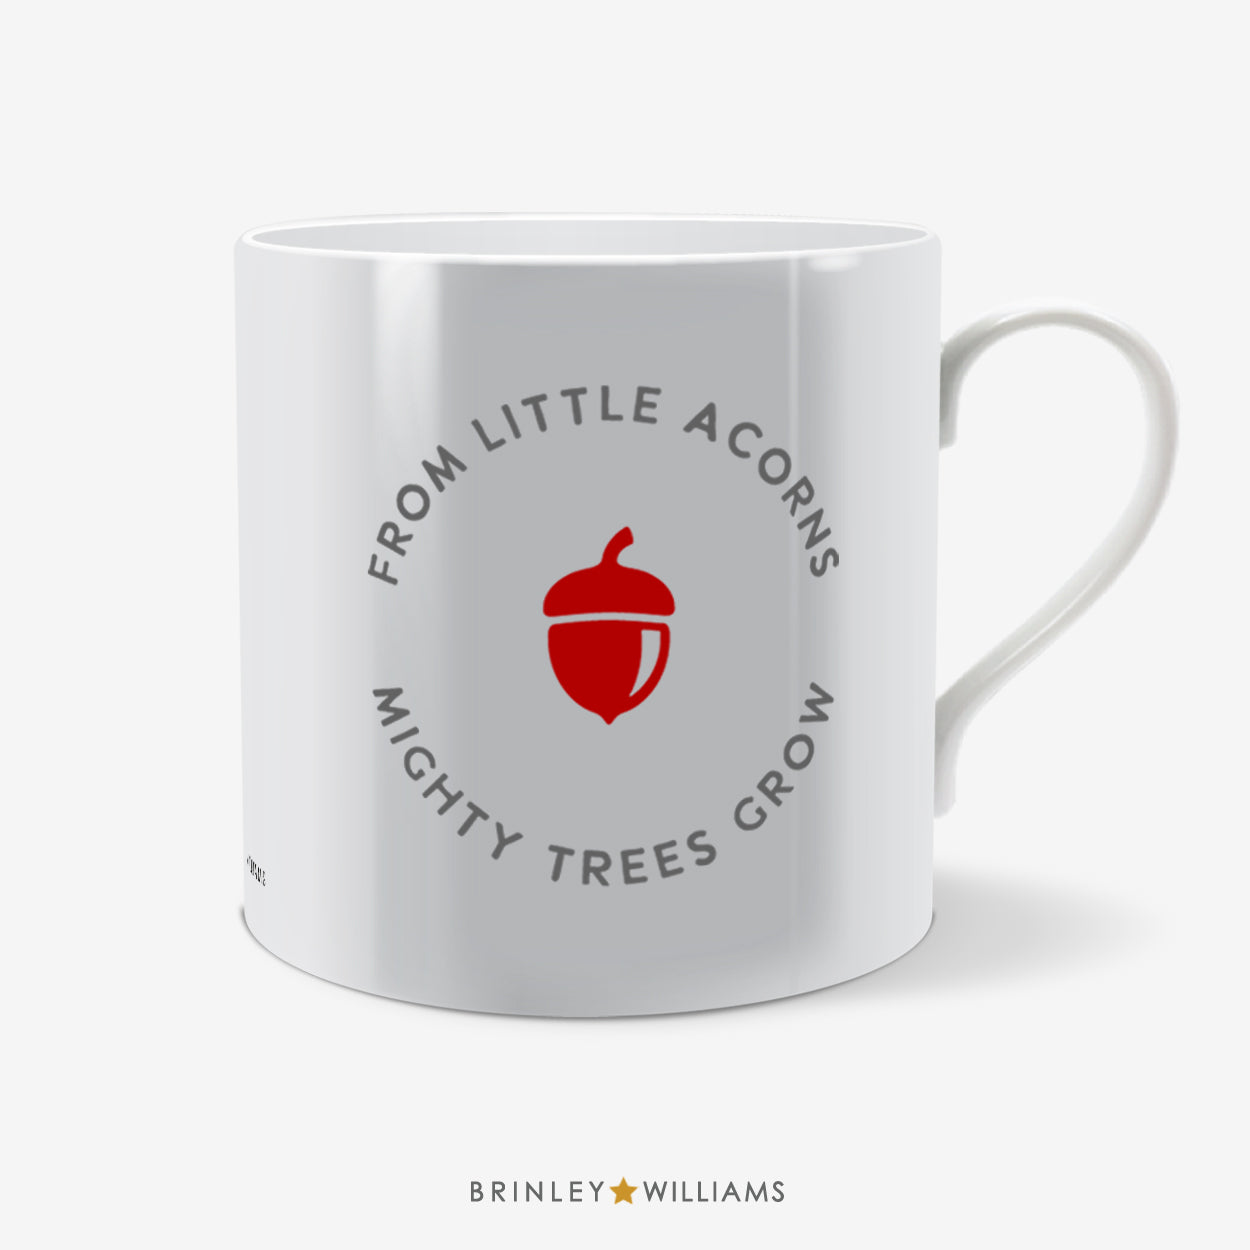 From little acorns mighty trees grow Fun Mug - Red